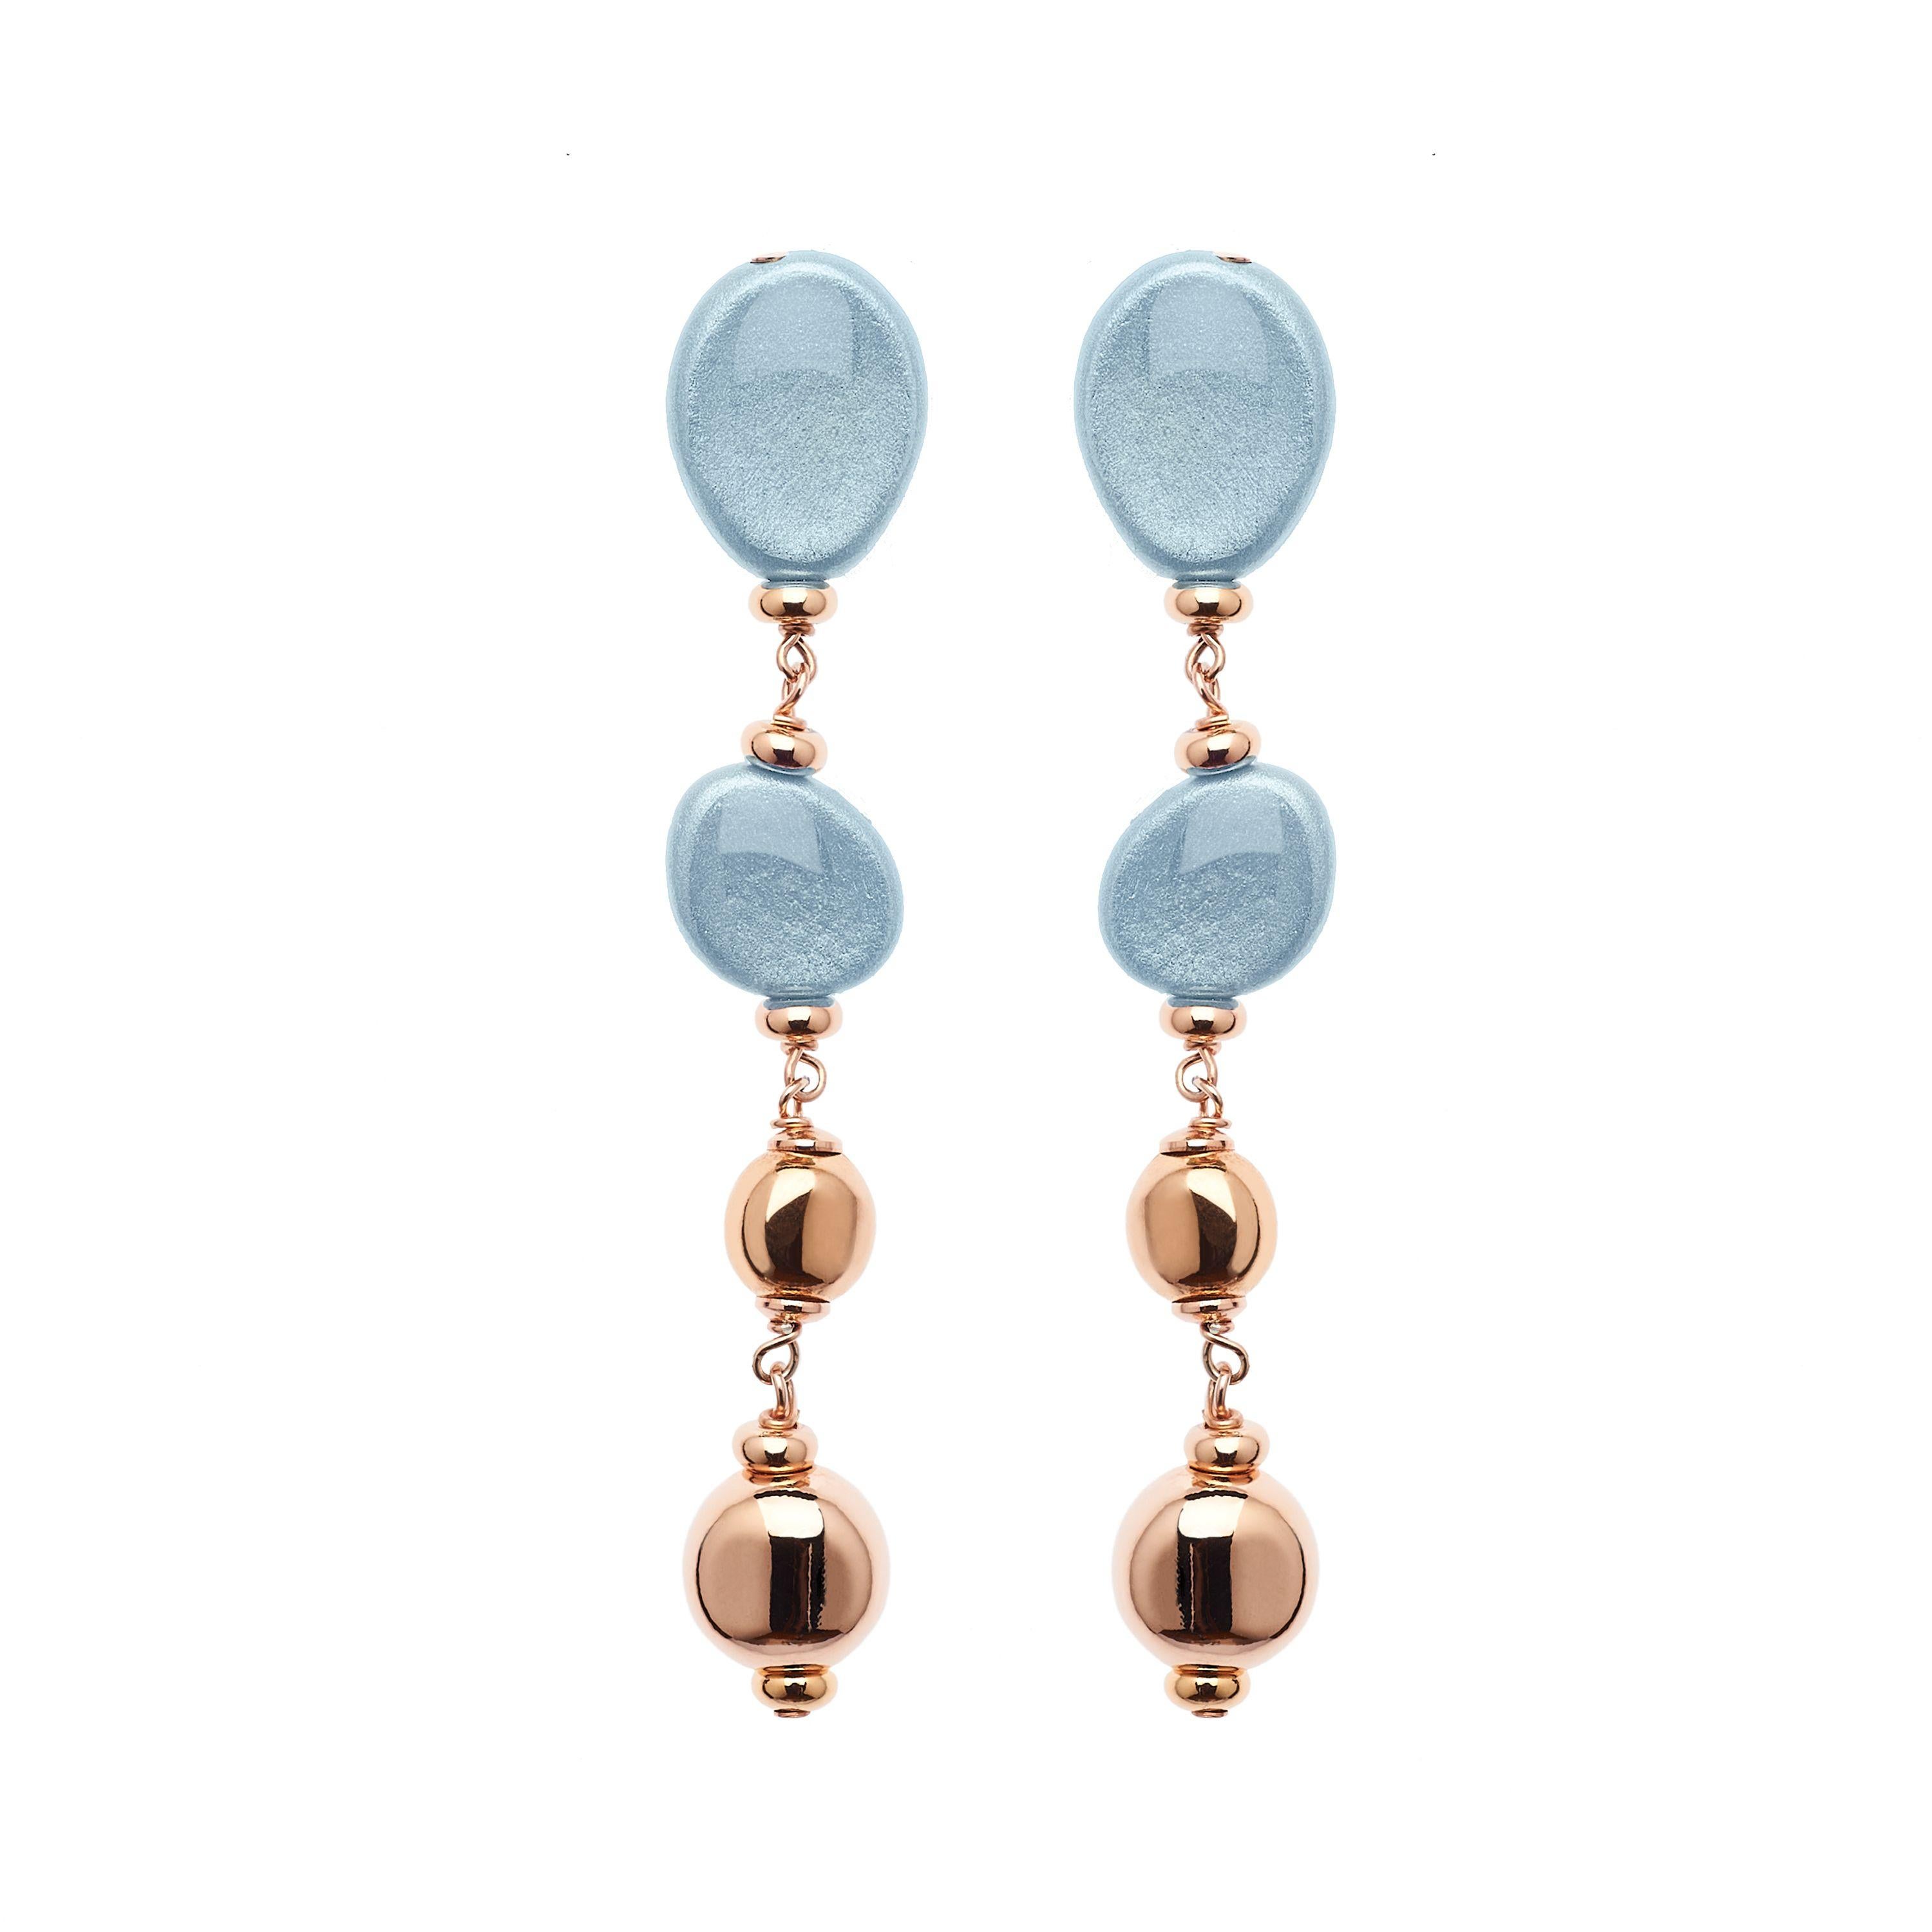 ROSSOPREZIOSO MISSISSIPI Earrings are made in reclaimed olive wood, lacquered and hand-enamelled embellished with 24-karat rose gold-plated 925 silver nuggets.
The color of the wood is a bright and luminous light blue. 
These earring are designed